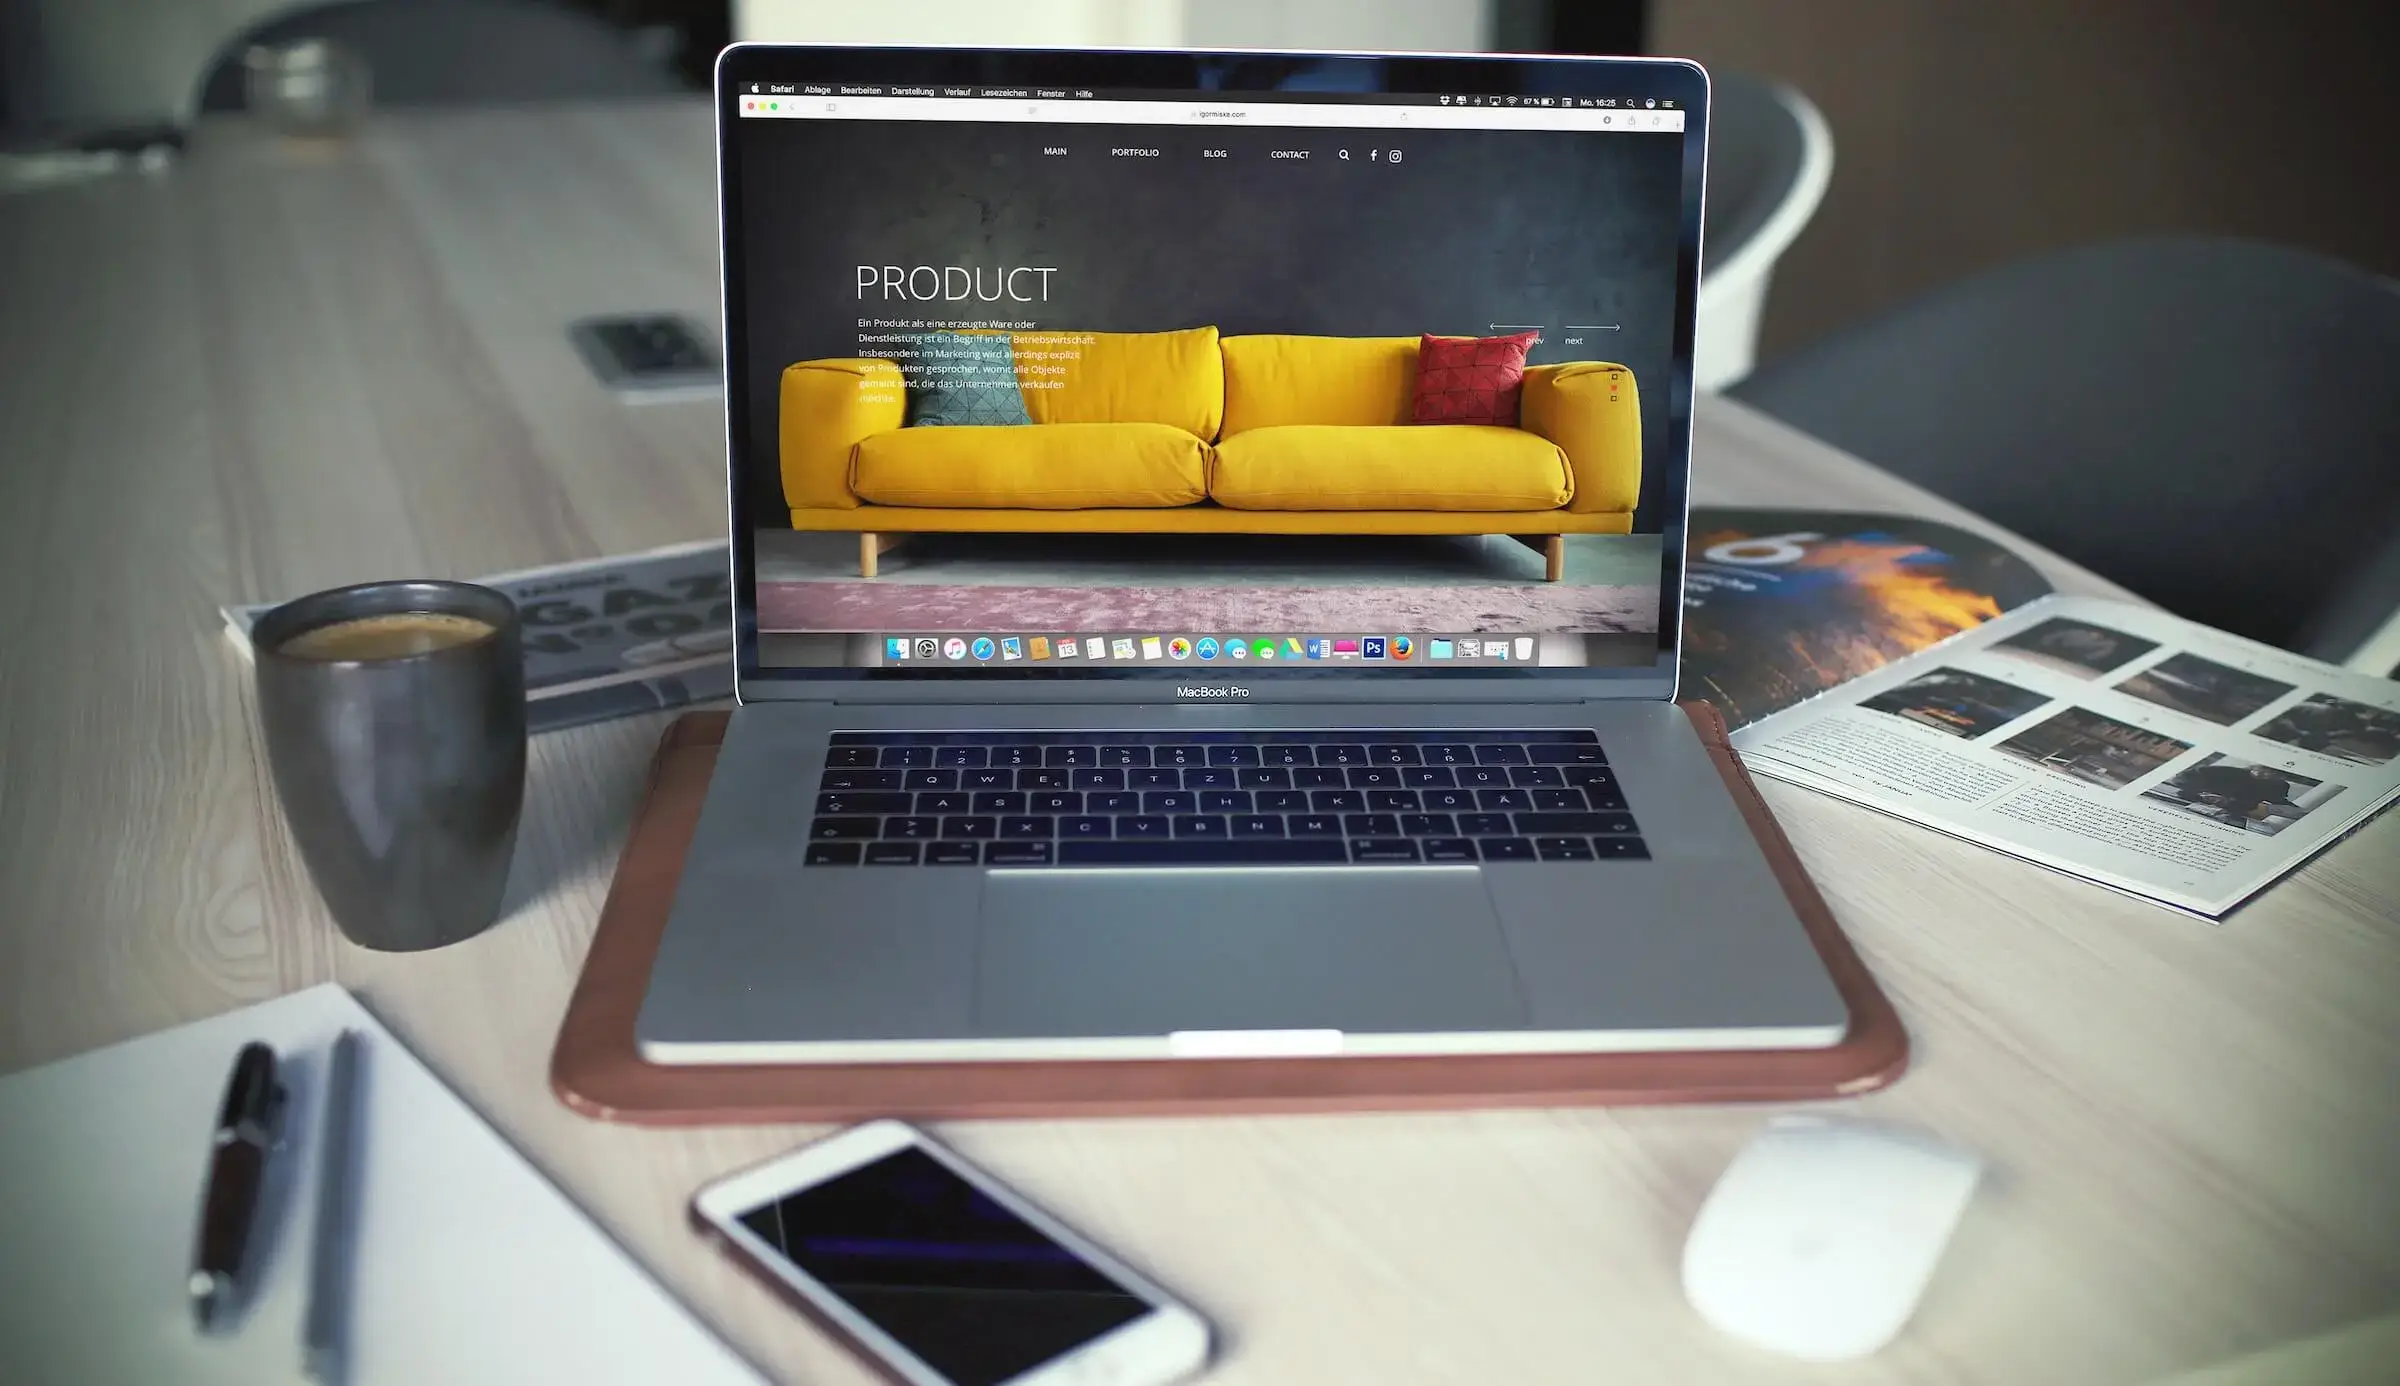 A Macbook Pro screen showing a sample of product landing page.